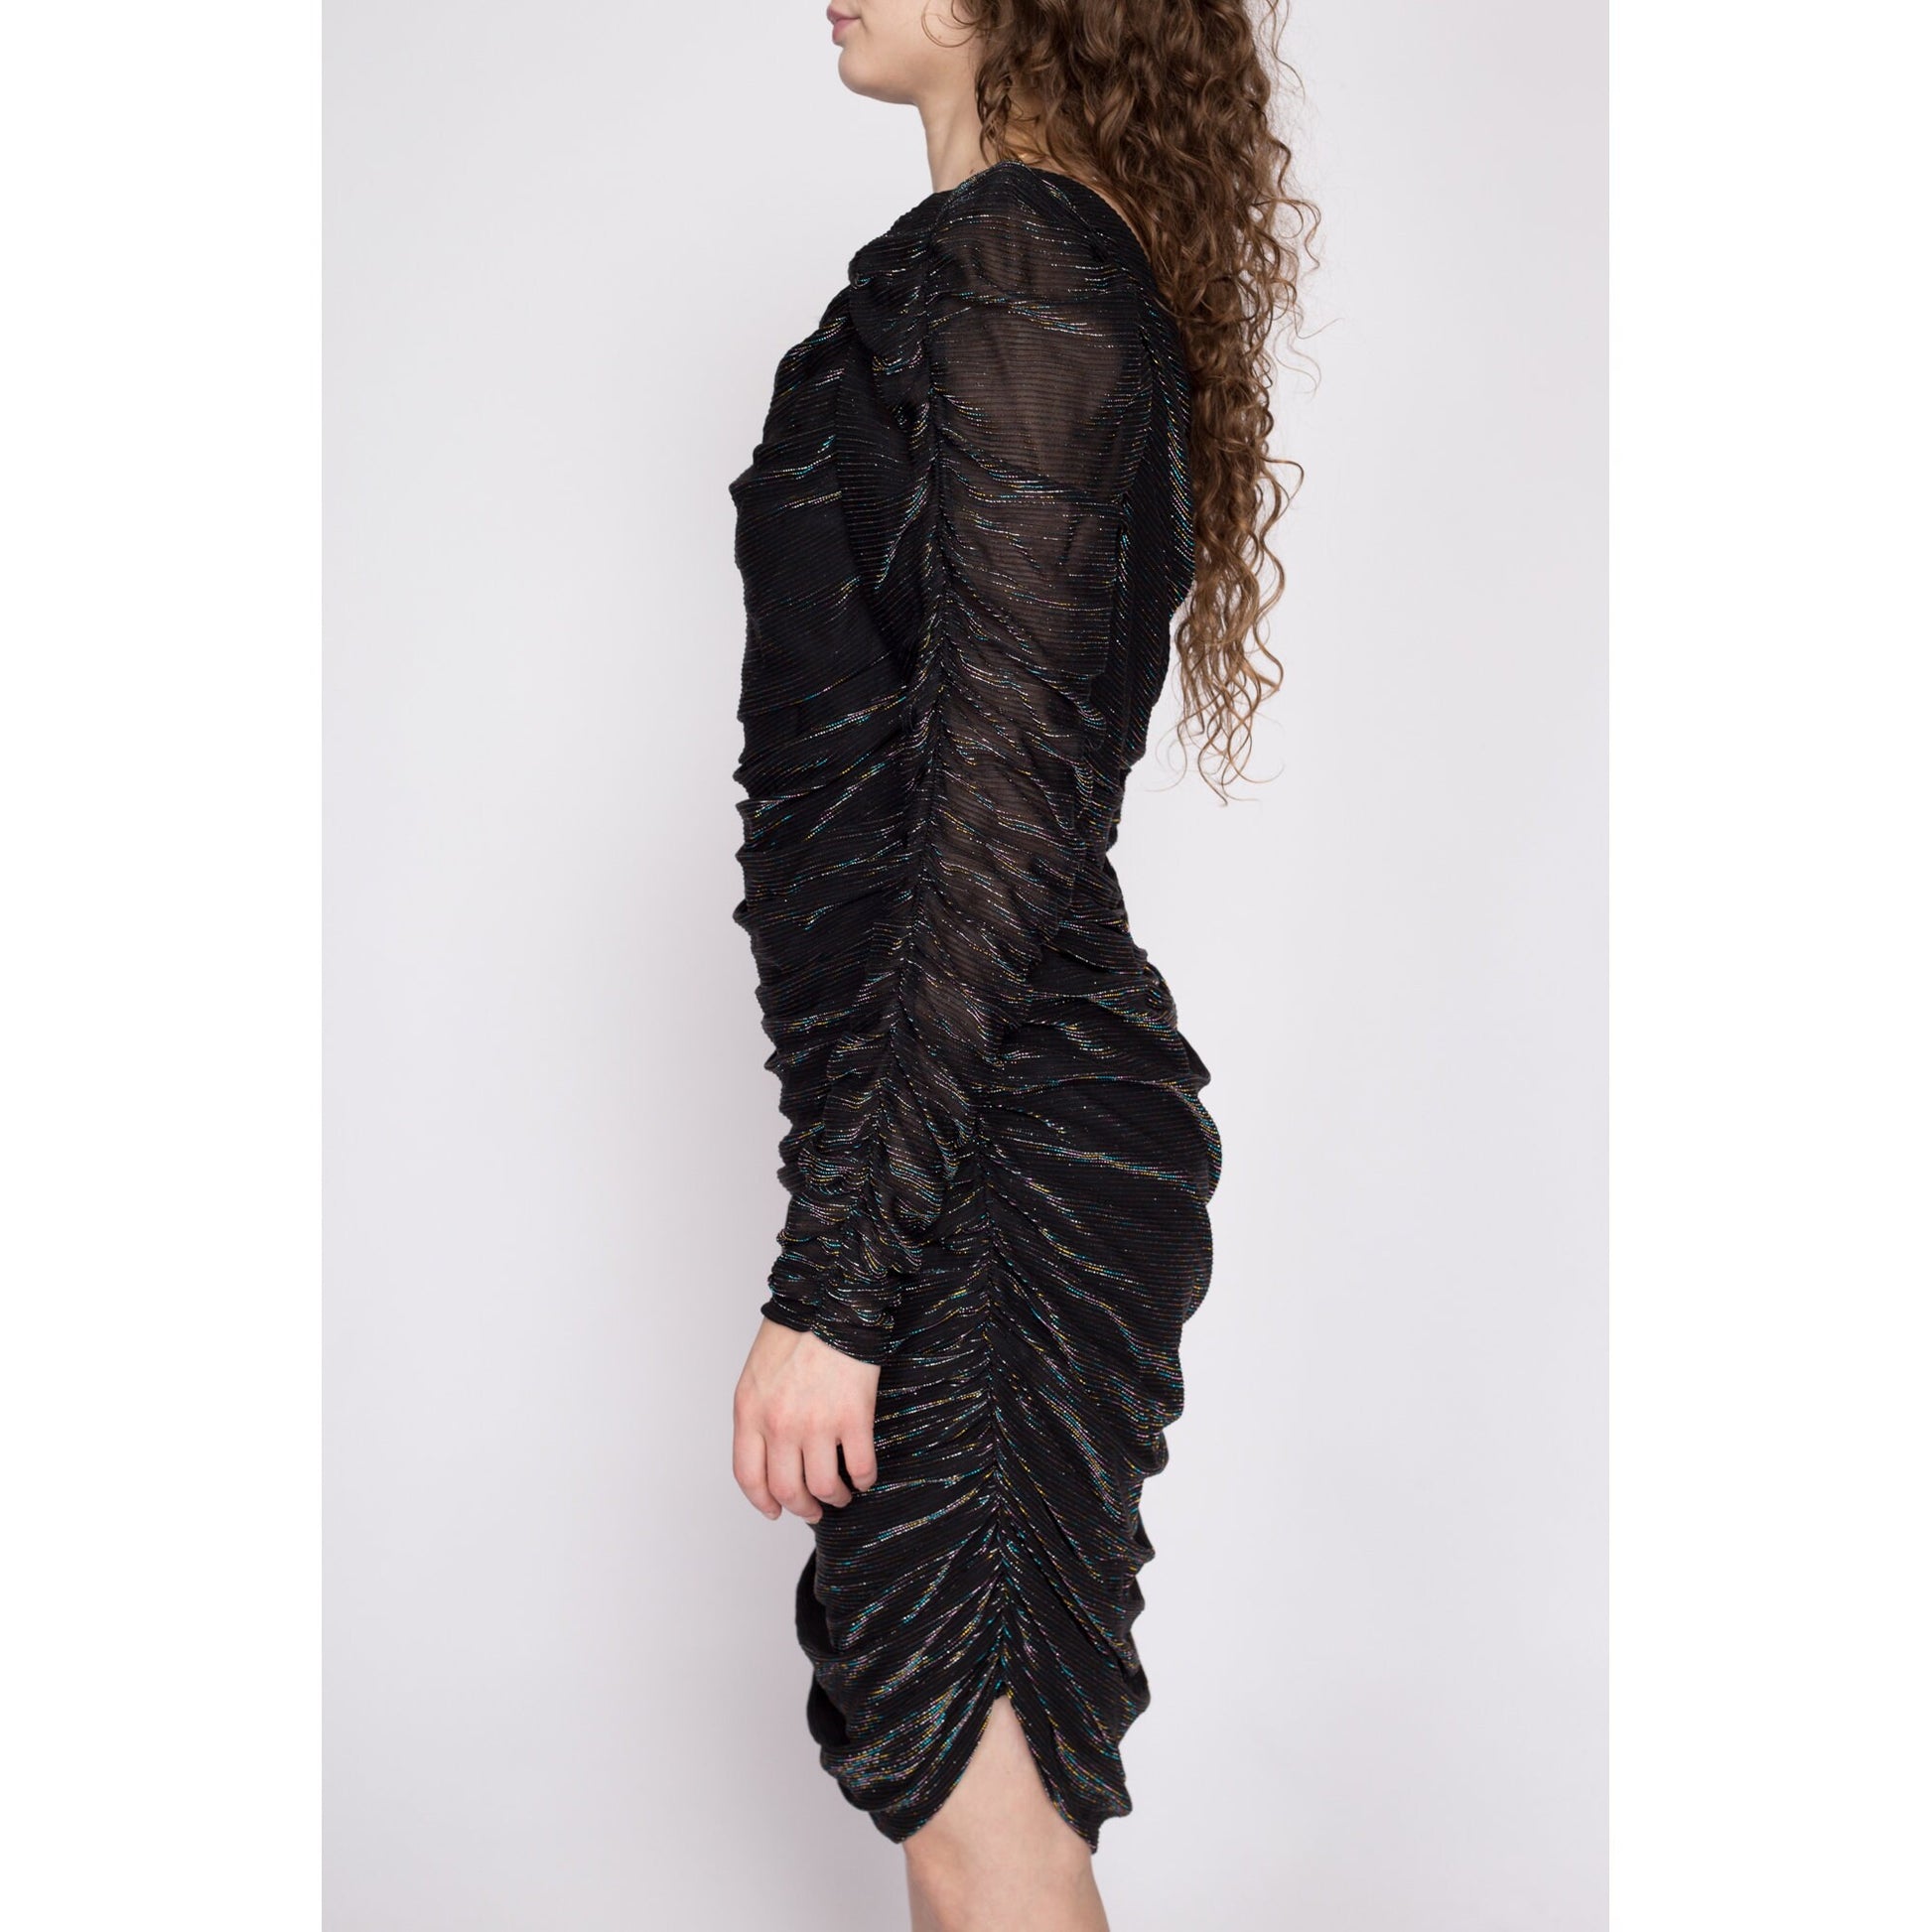 70s Black Ruched Coffin Pleat Dress - Medium to Large | Vintage Boho Sheer Puff Sleeve Bodycon Party Dress